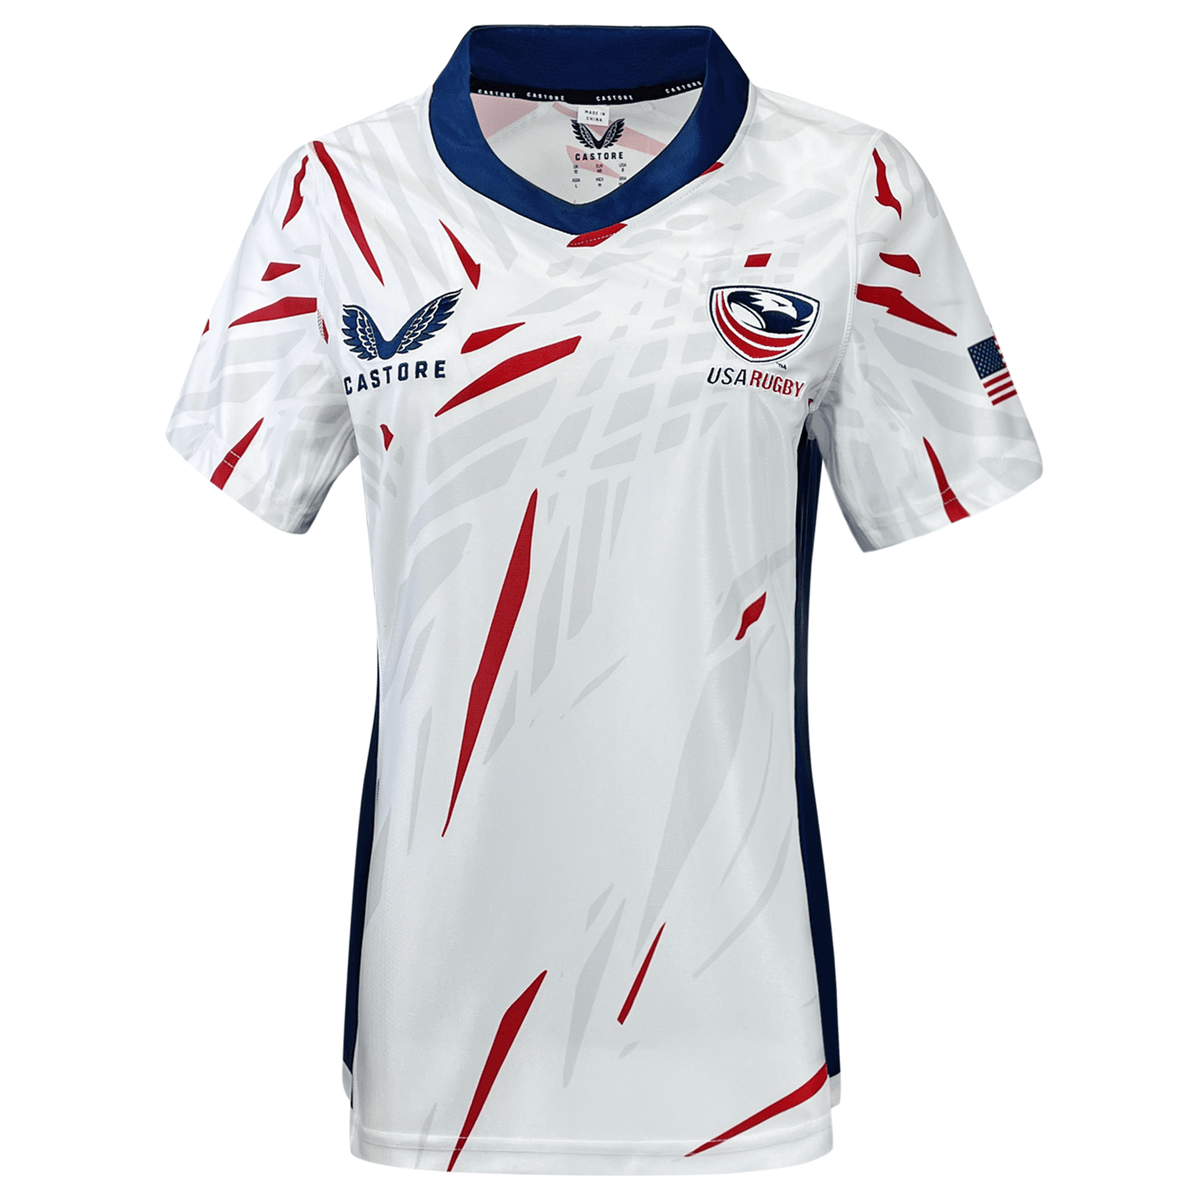 USA Rugby Women's Away Jersey by Castore - World Rugby Shop